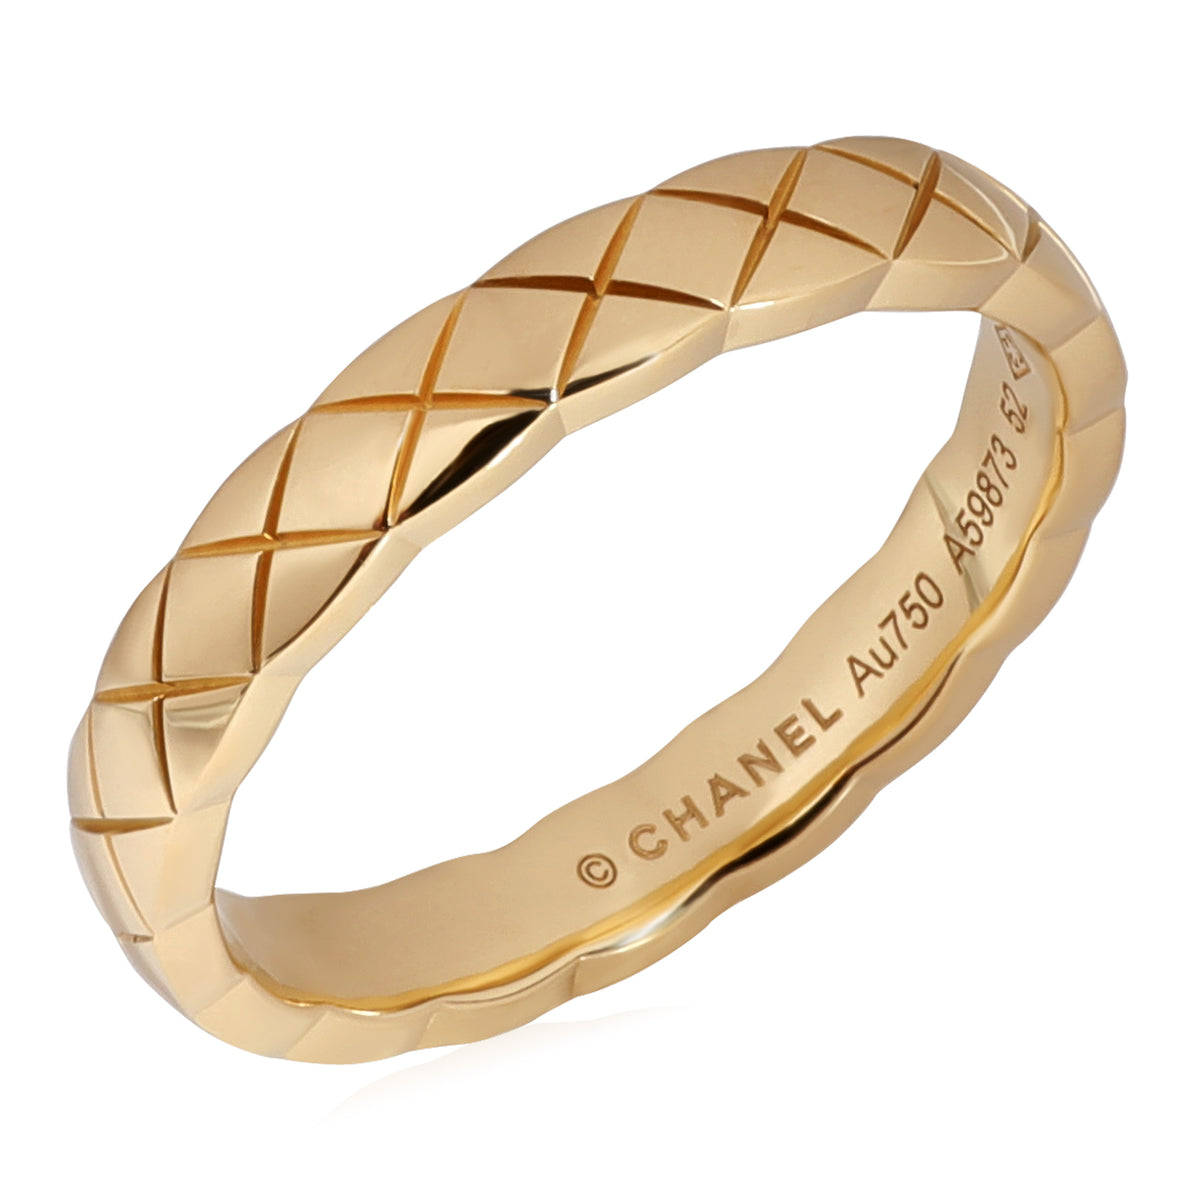 Chanel - Authenticated Coco Crush Ring - Yellow Gold Black for Women, Very Good Condition